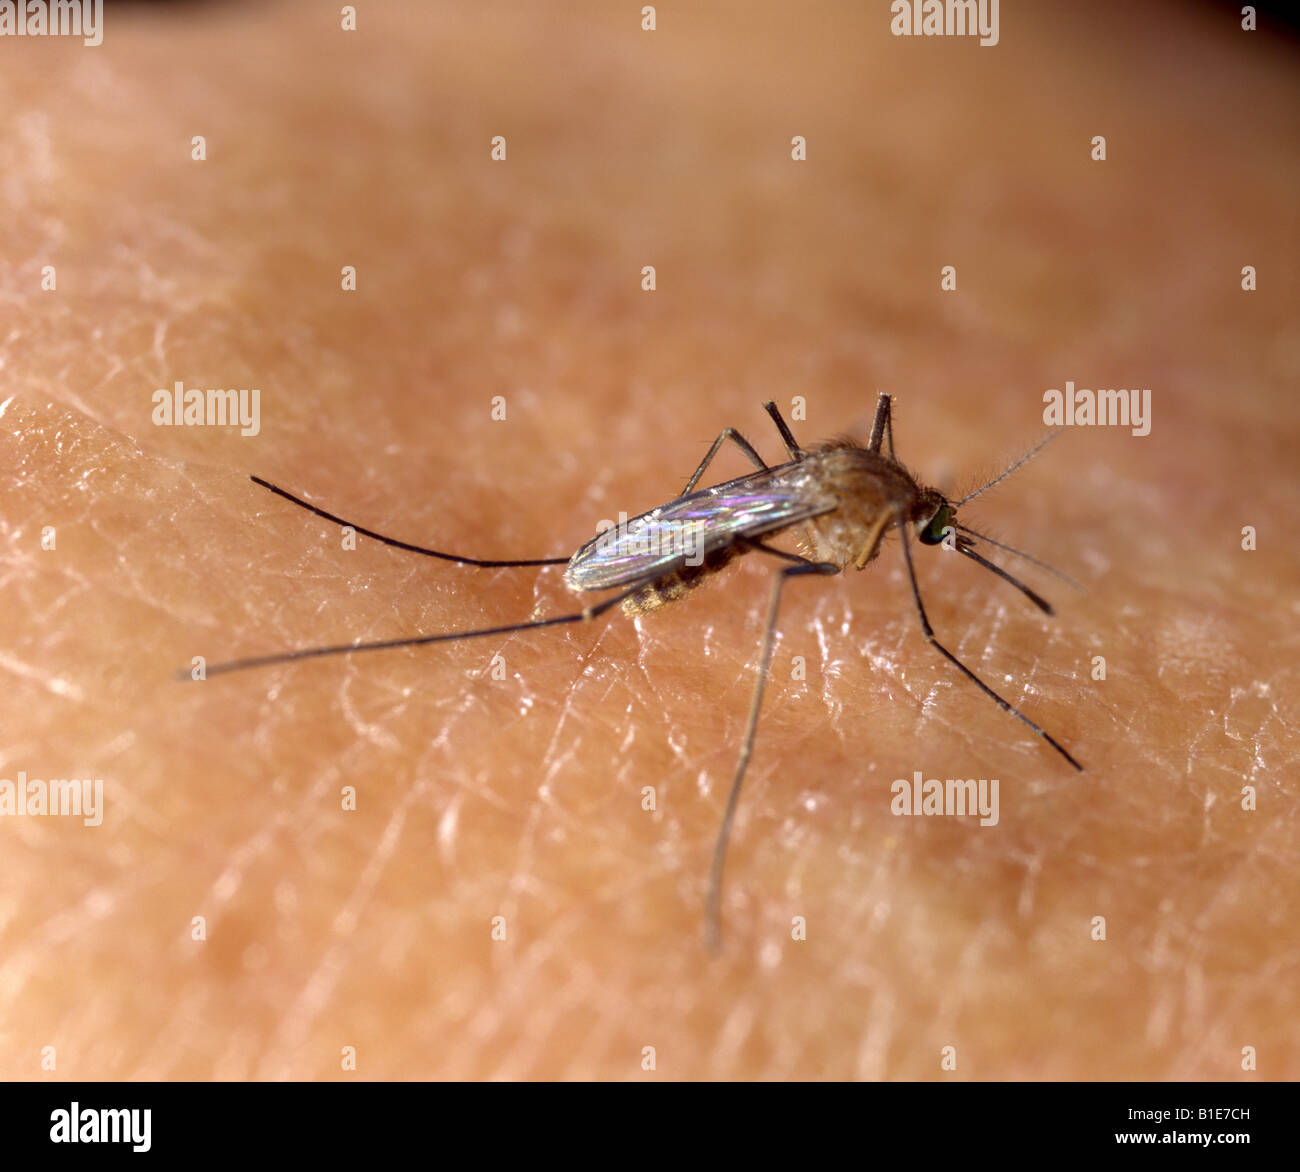 HOUSE MOSQUITO CULEX PIPIENS FEMALE MOSQUITO ON HUMAN SKIN VECTOR FOR HUMAN DISEASES STUDIO 5X Stock Photo